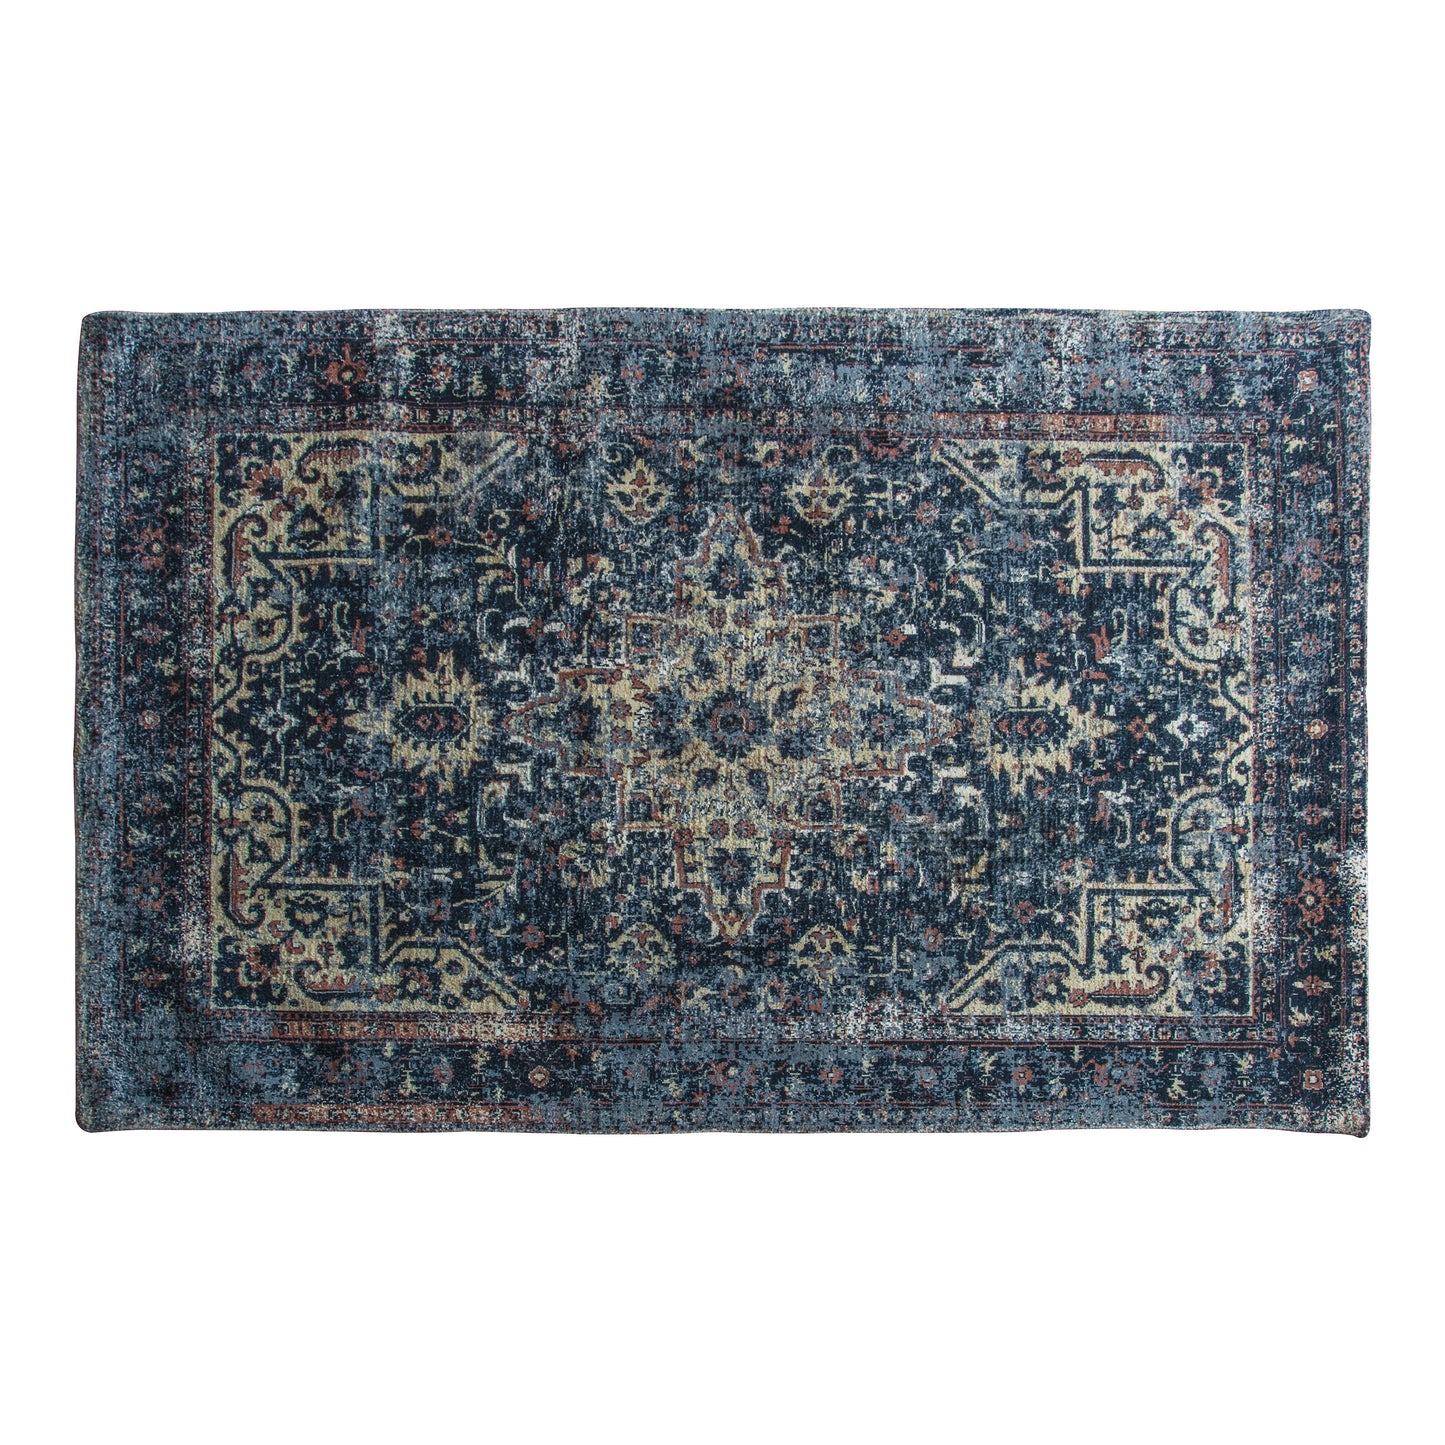 A Kern Rug Dark Teal 2000x2900mm with an ornate design from Kikiathome.co.uk perfect for interior decor or home furniture.